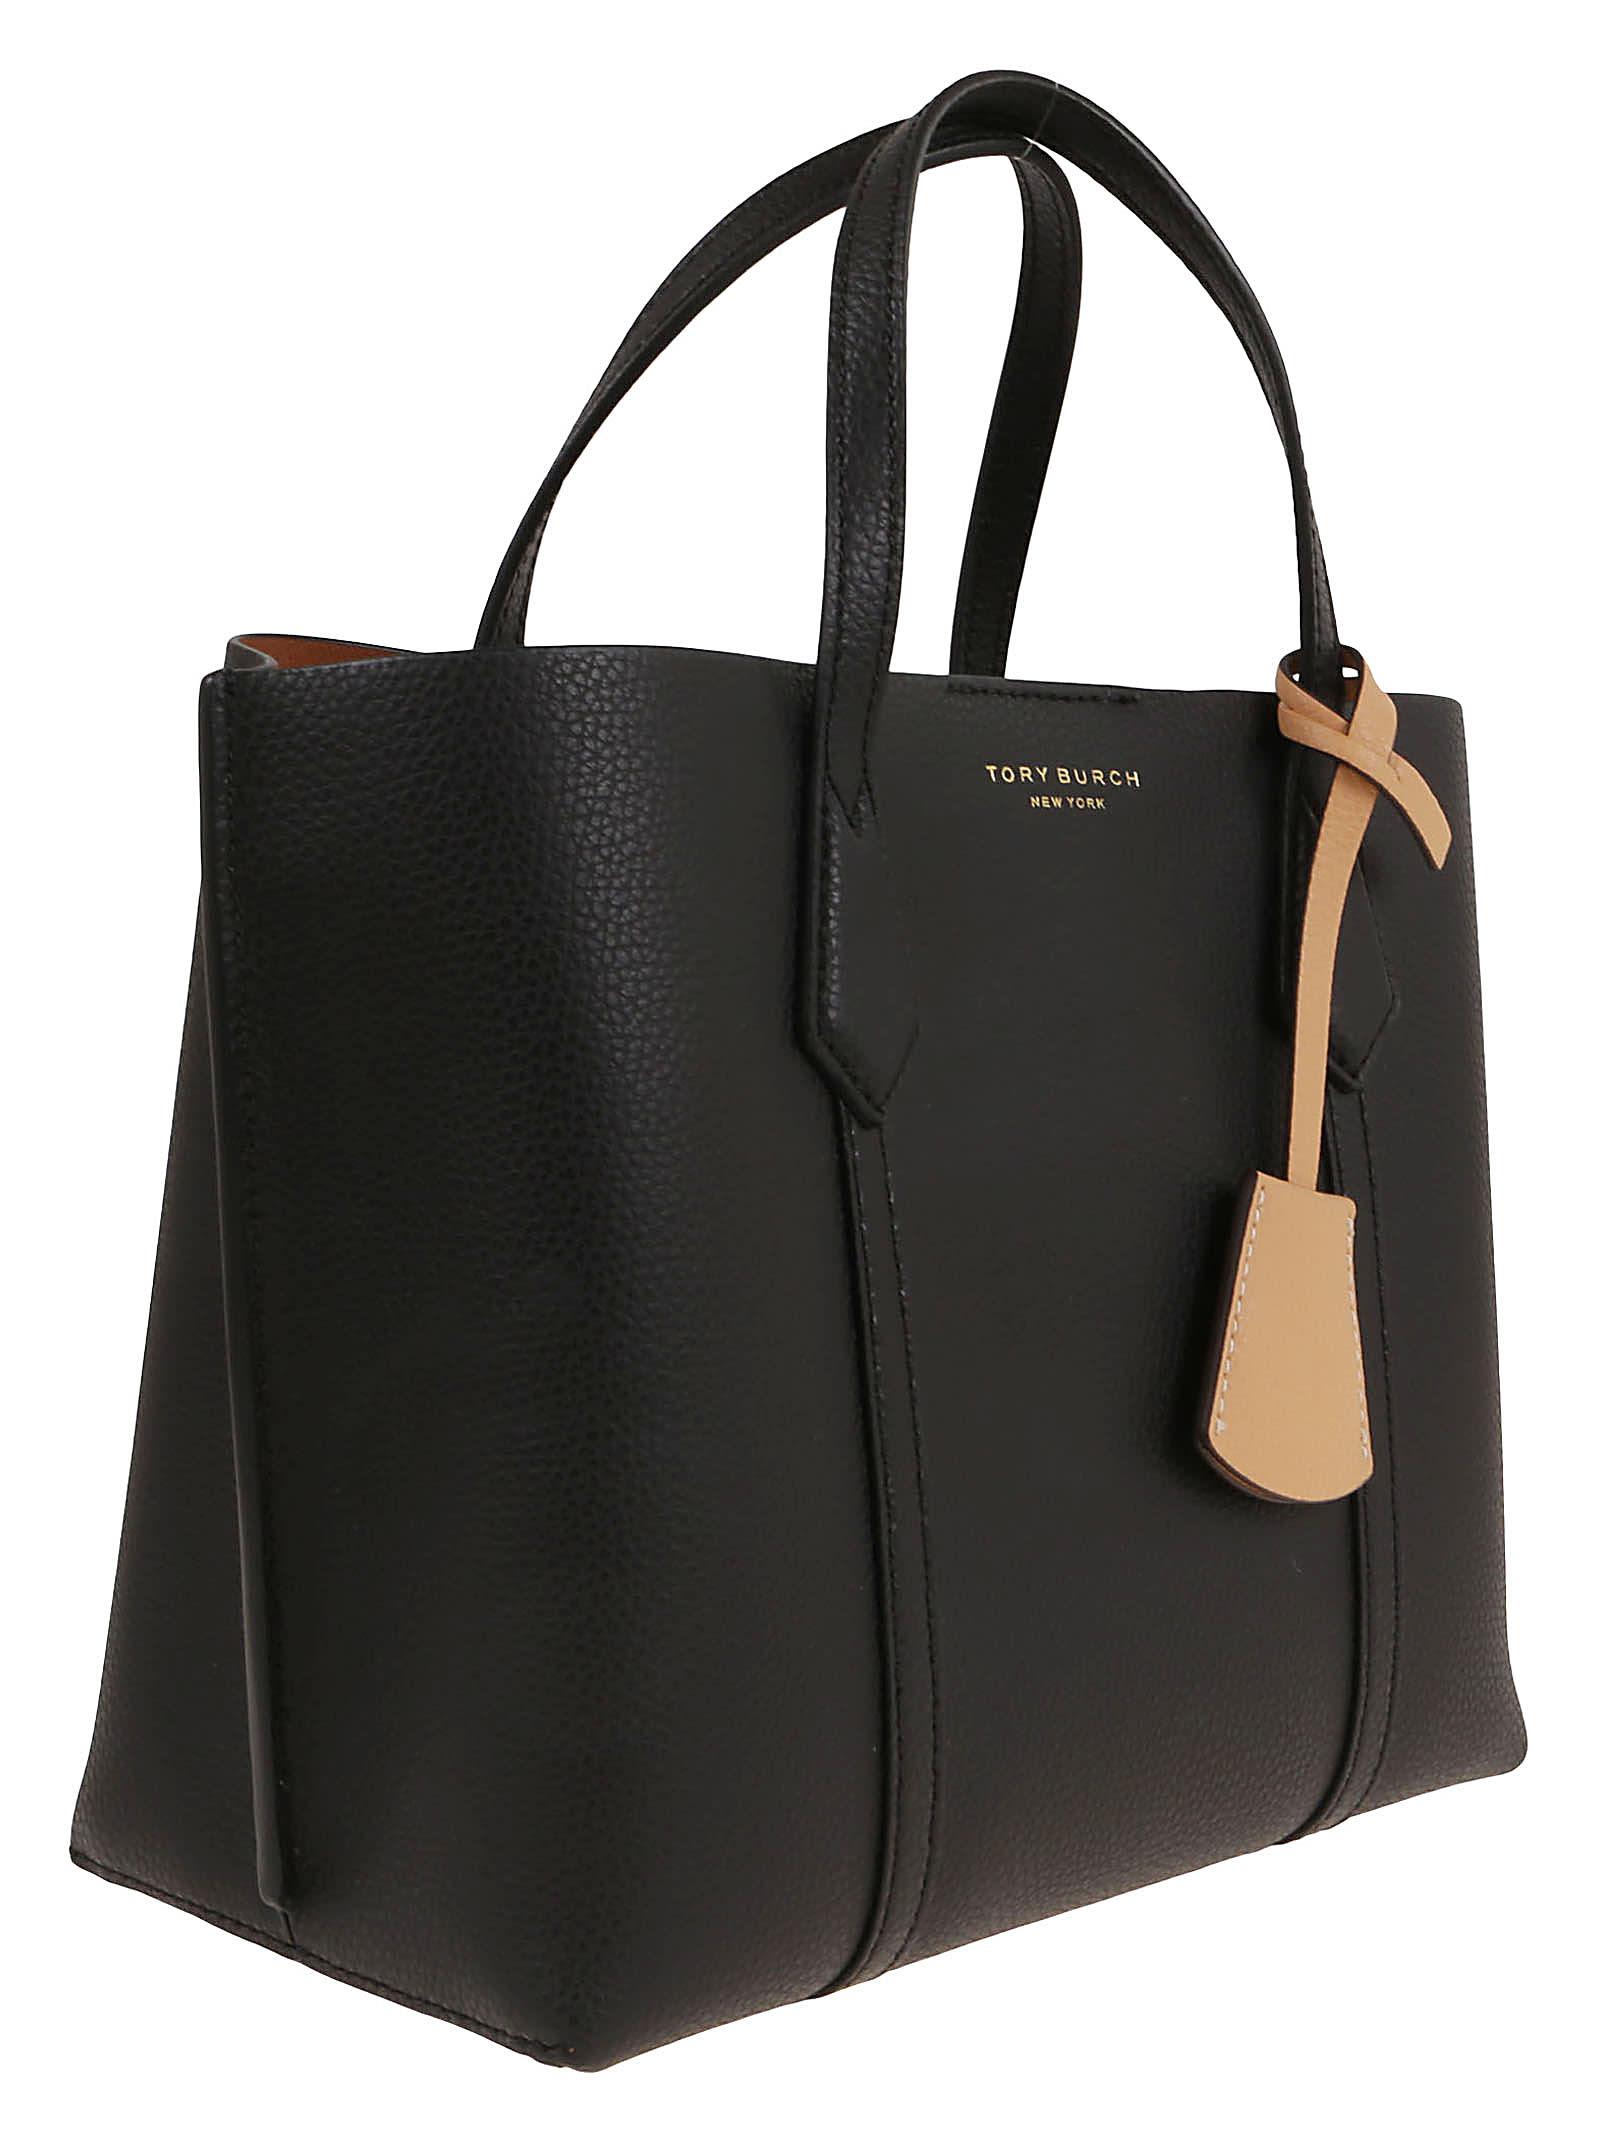 Tory Burch Perry Small Triple-compartment Tote in Black